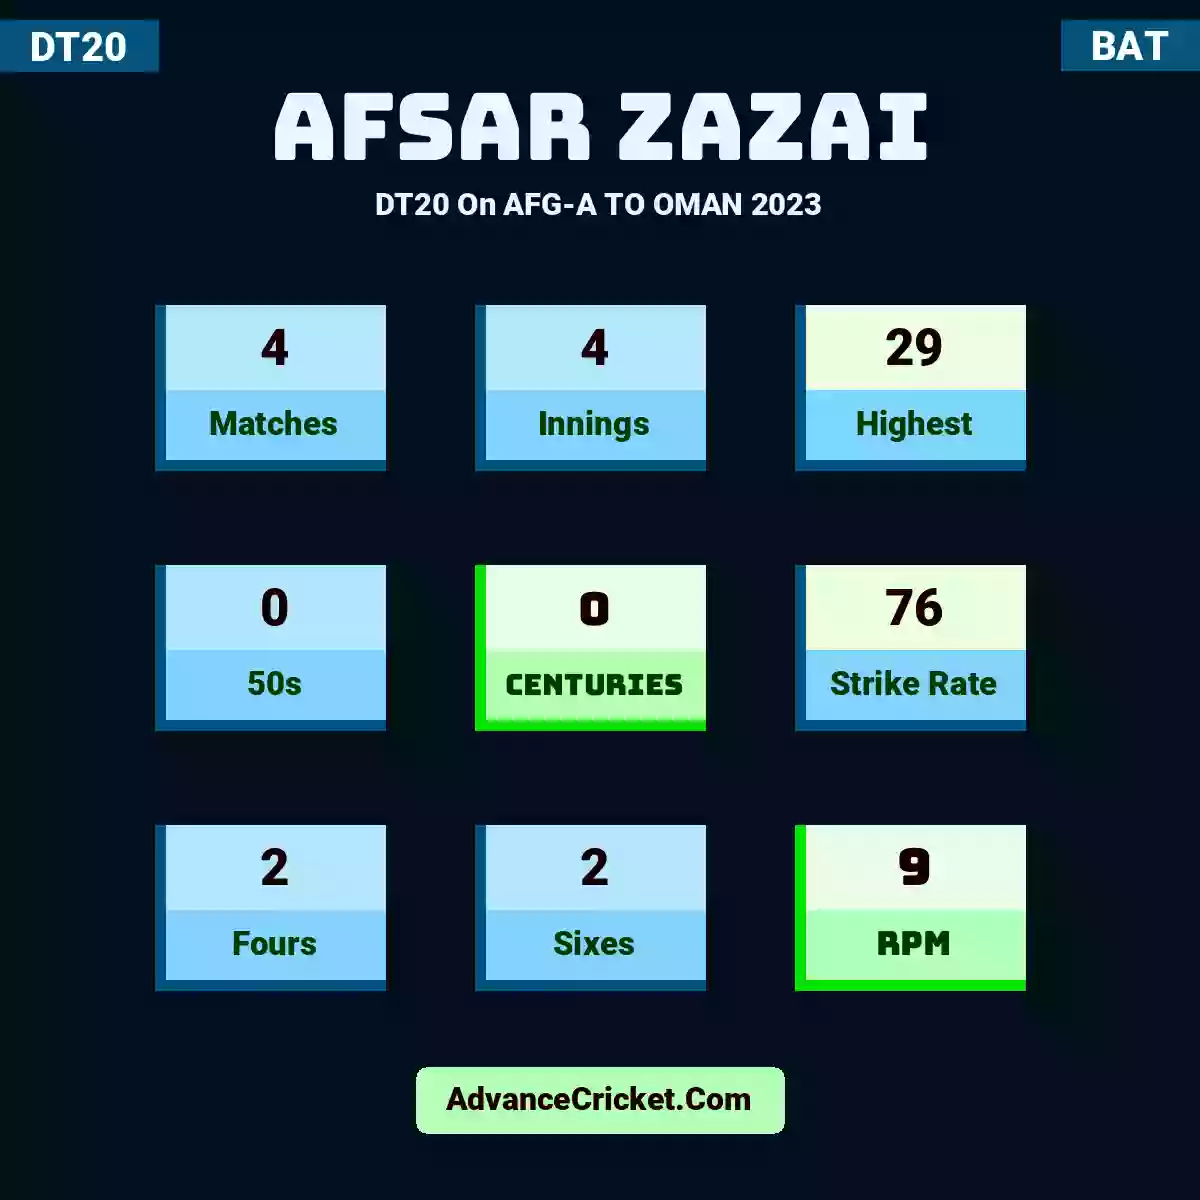 Afsar Zazai DT20  On AFG-A TO OMAN 2023, Afsar Zazai played 4 matches, scored 29 runs as highest, 0 half-centuries, and 0 centuries, with a strike rate of 76. A.Zazai hit 2 fours and 2 sixes, with an RPM of 9.